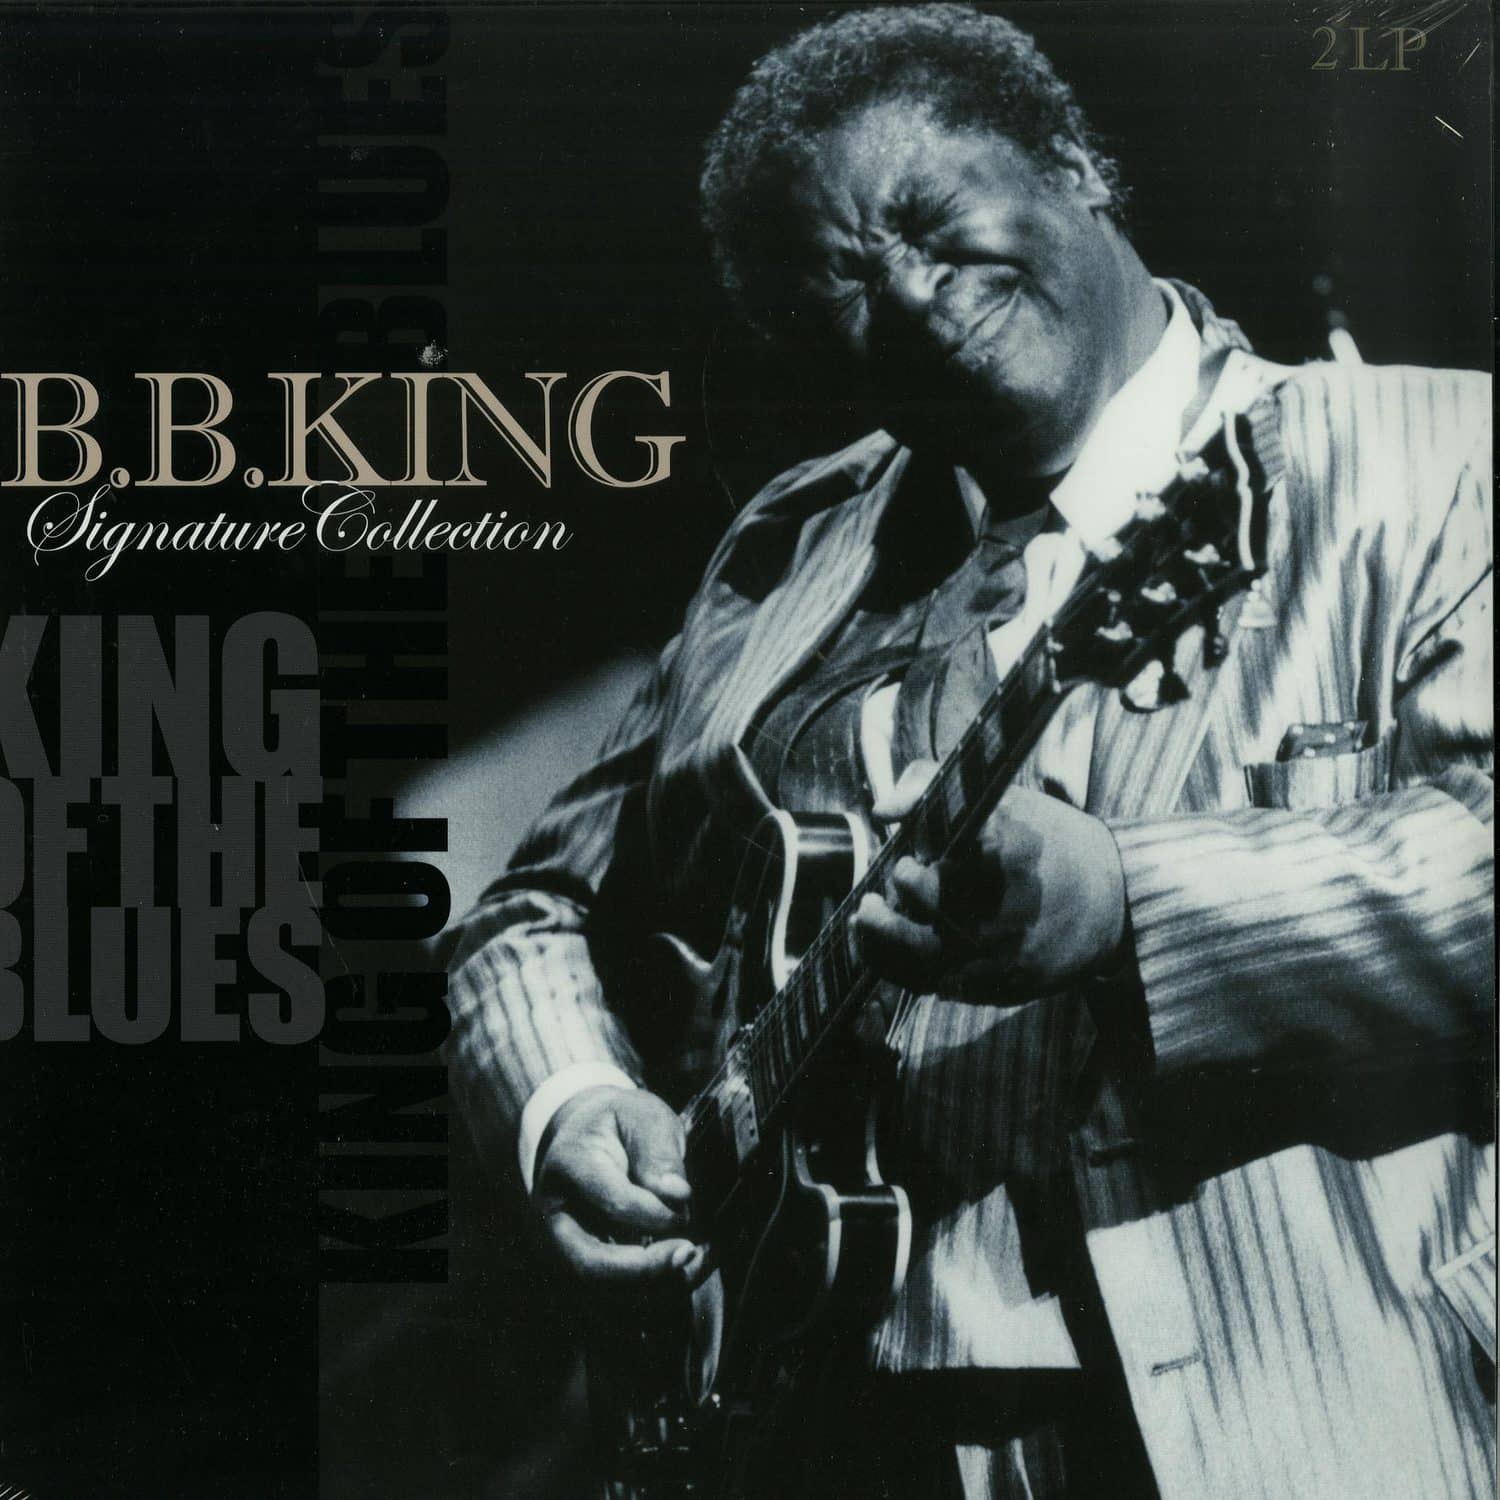 B.B. King - SIGNATURE COLLECTION 